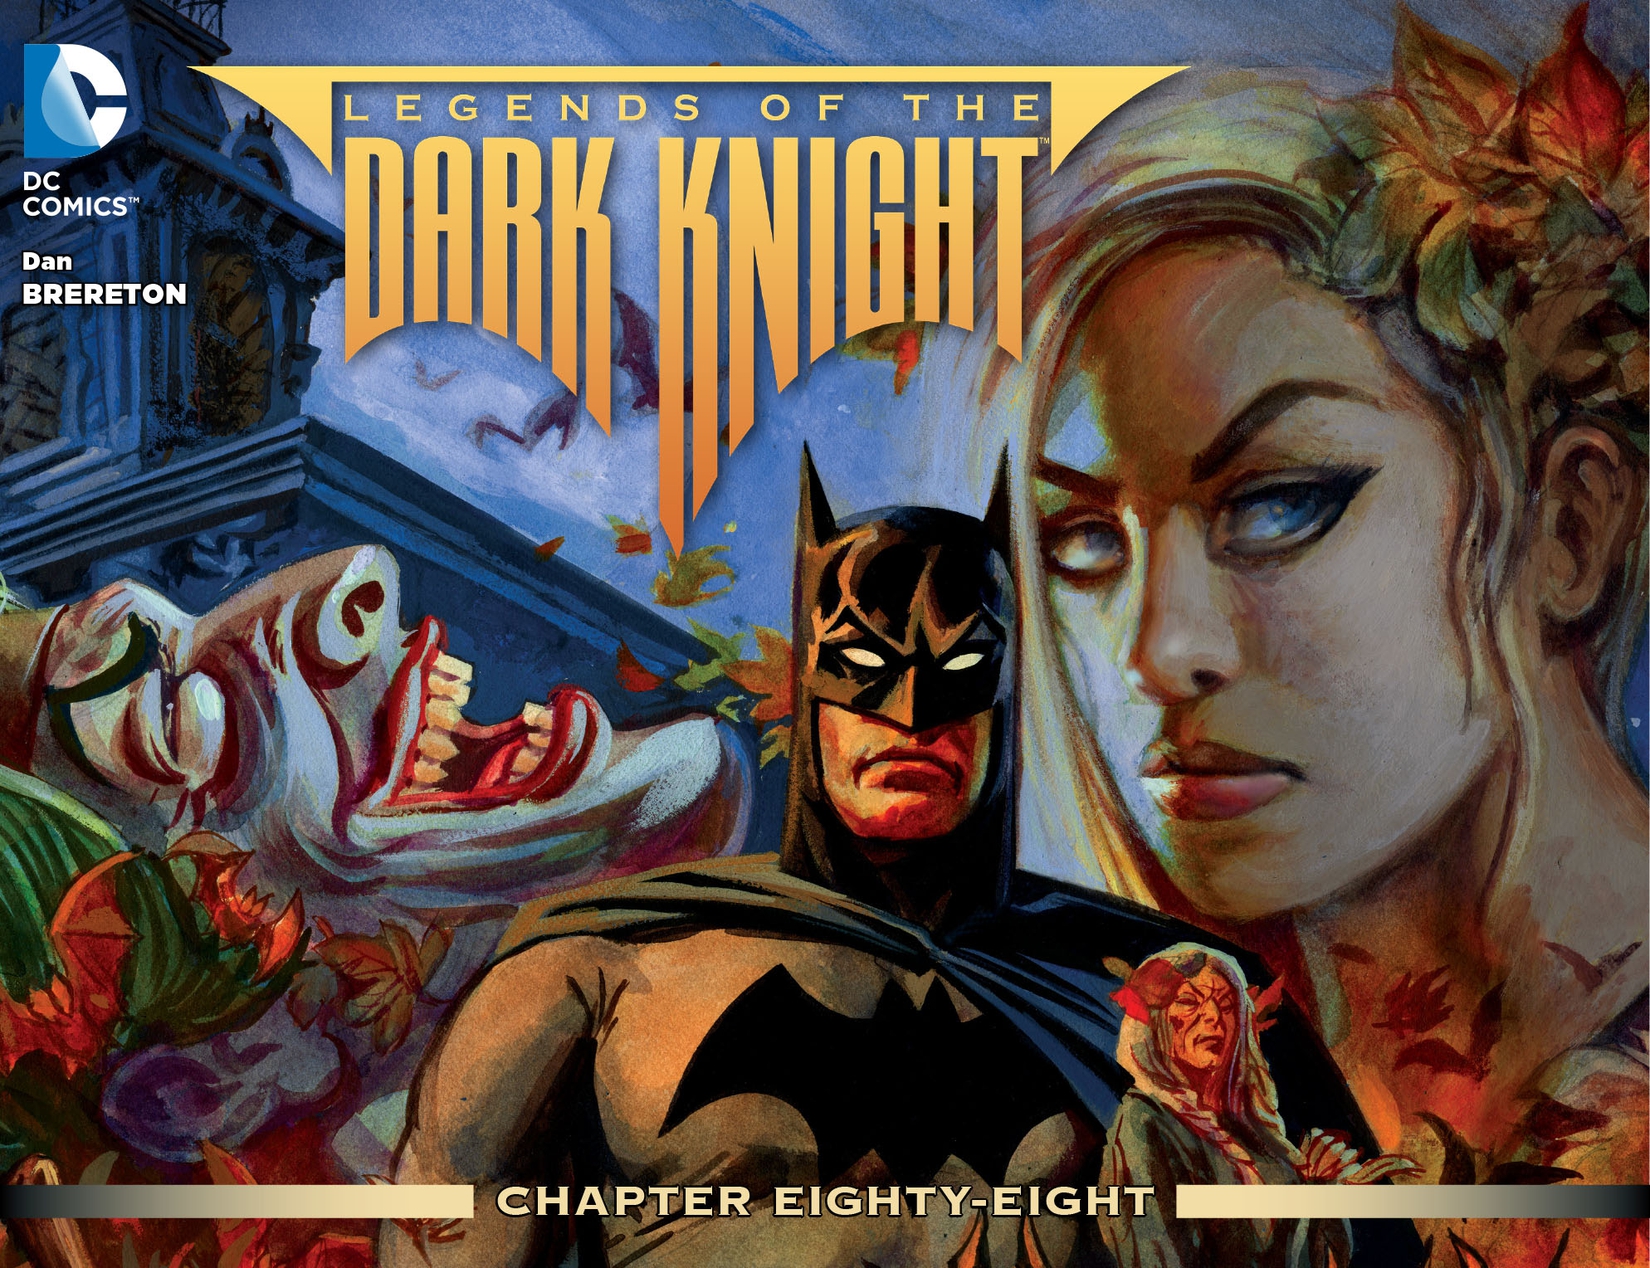 Legends of the Dark Knight #88 preview images